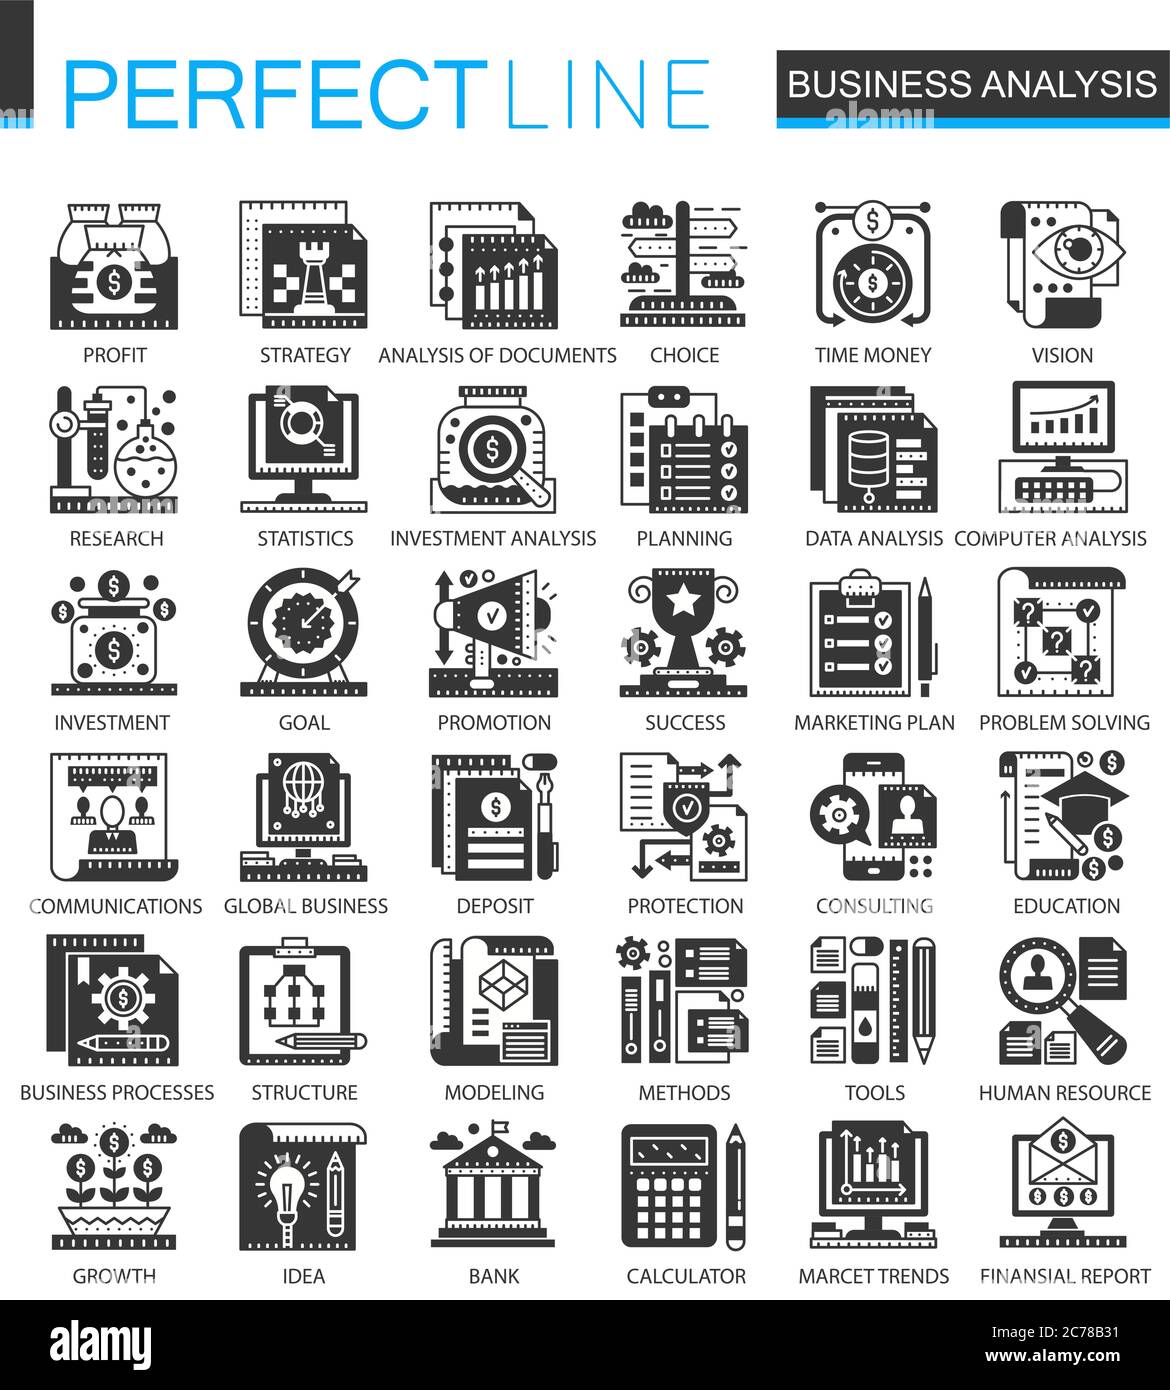 Vector Business analytics classic black mini concept icons and infographic symbols Stock Vector